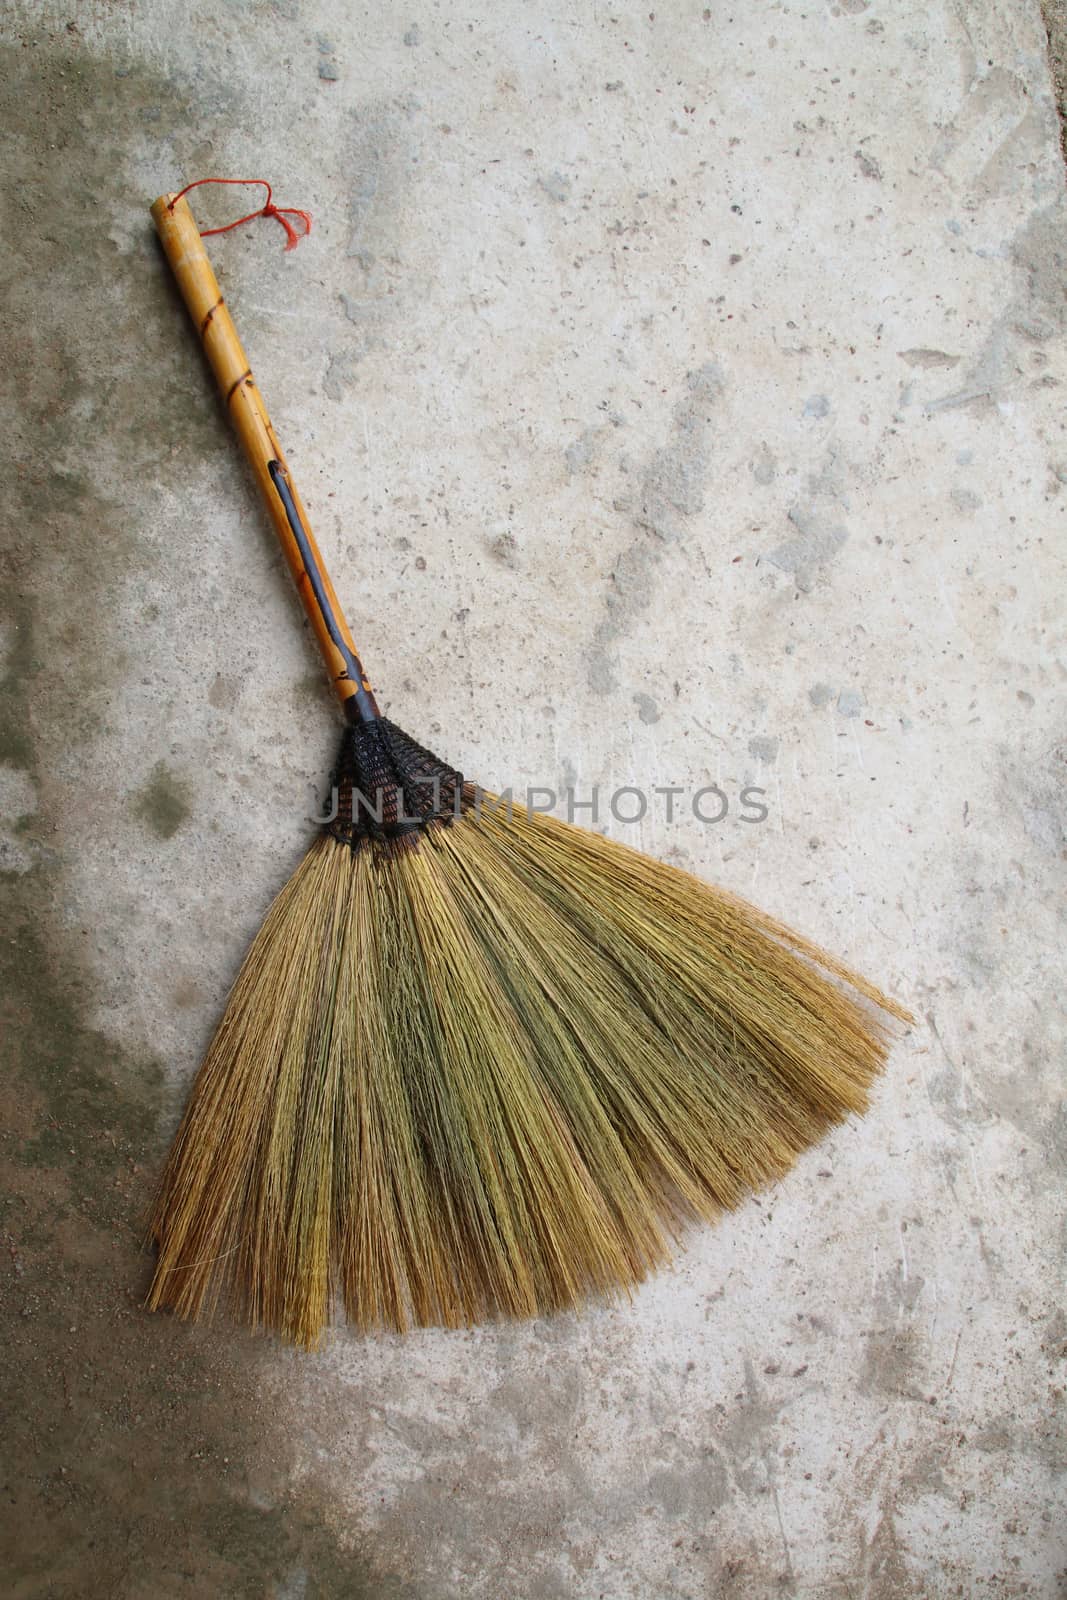 The little broom is handicraft from folk wisdom.Use for cleaning dust on anything except floor.